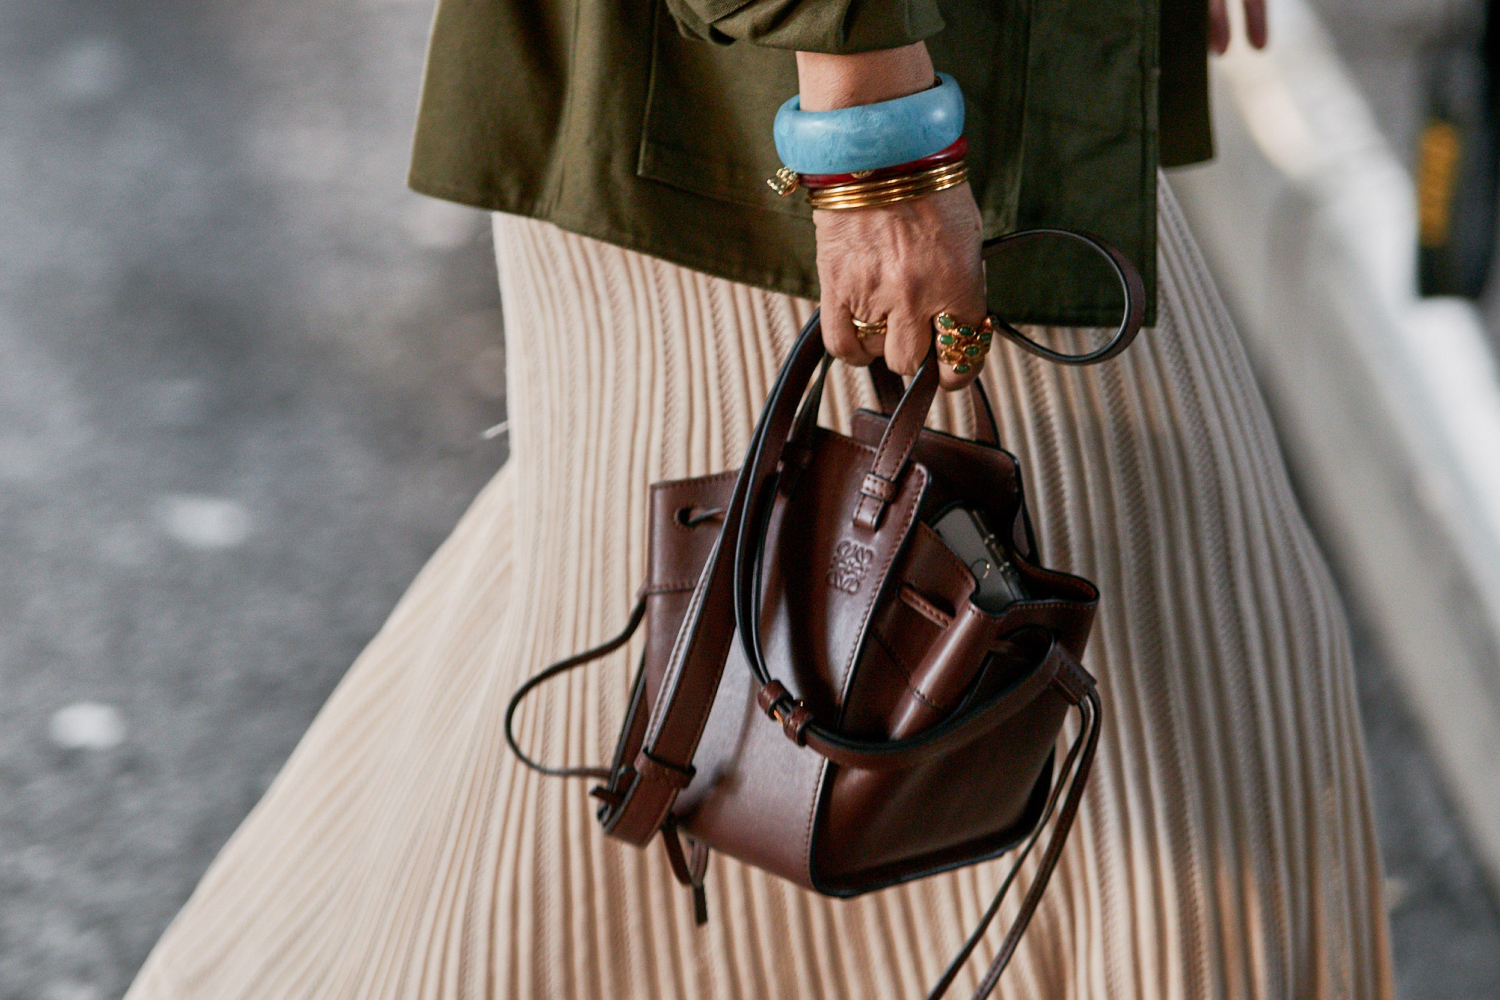 These are the top 3 bag trends of spring according to the creative